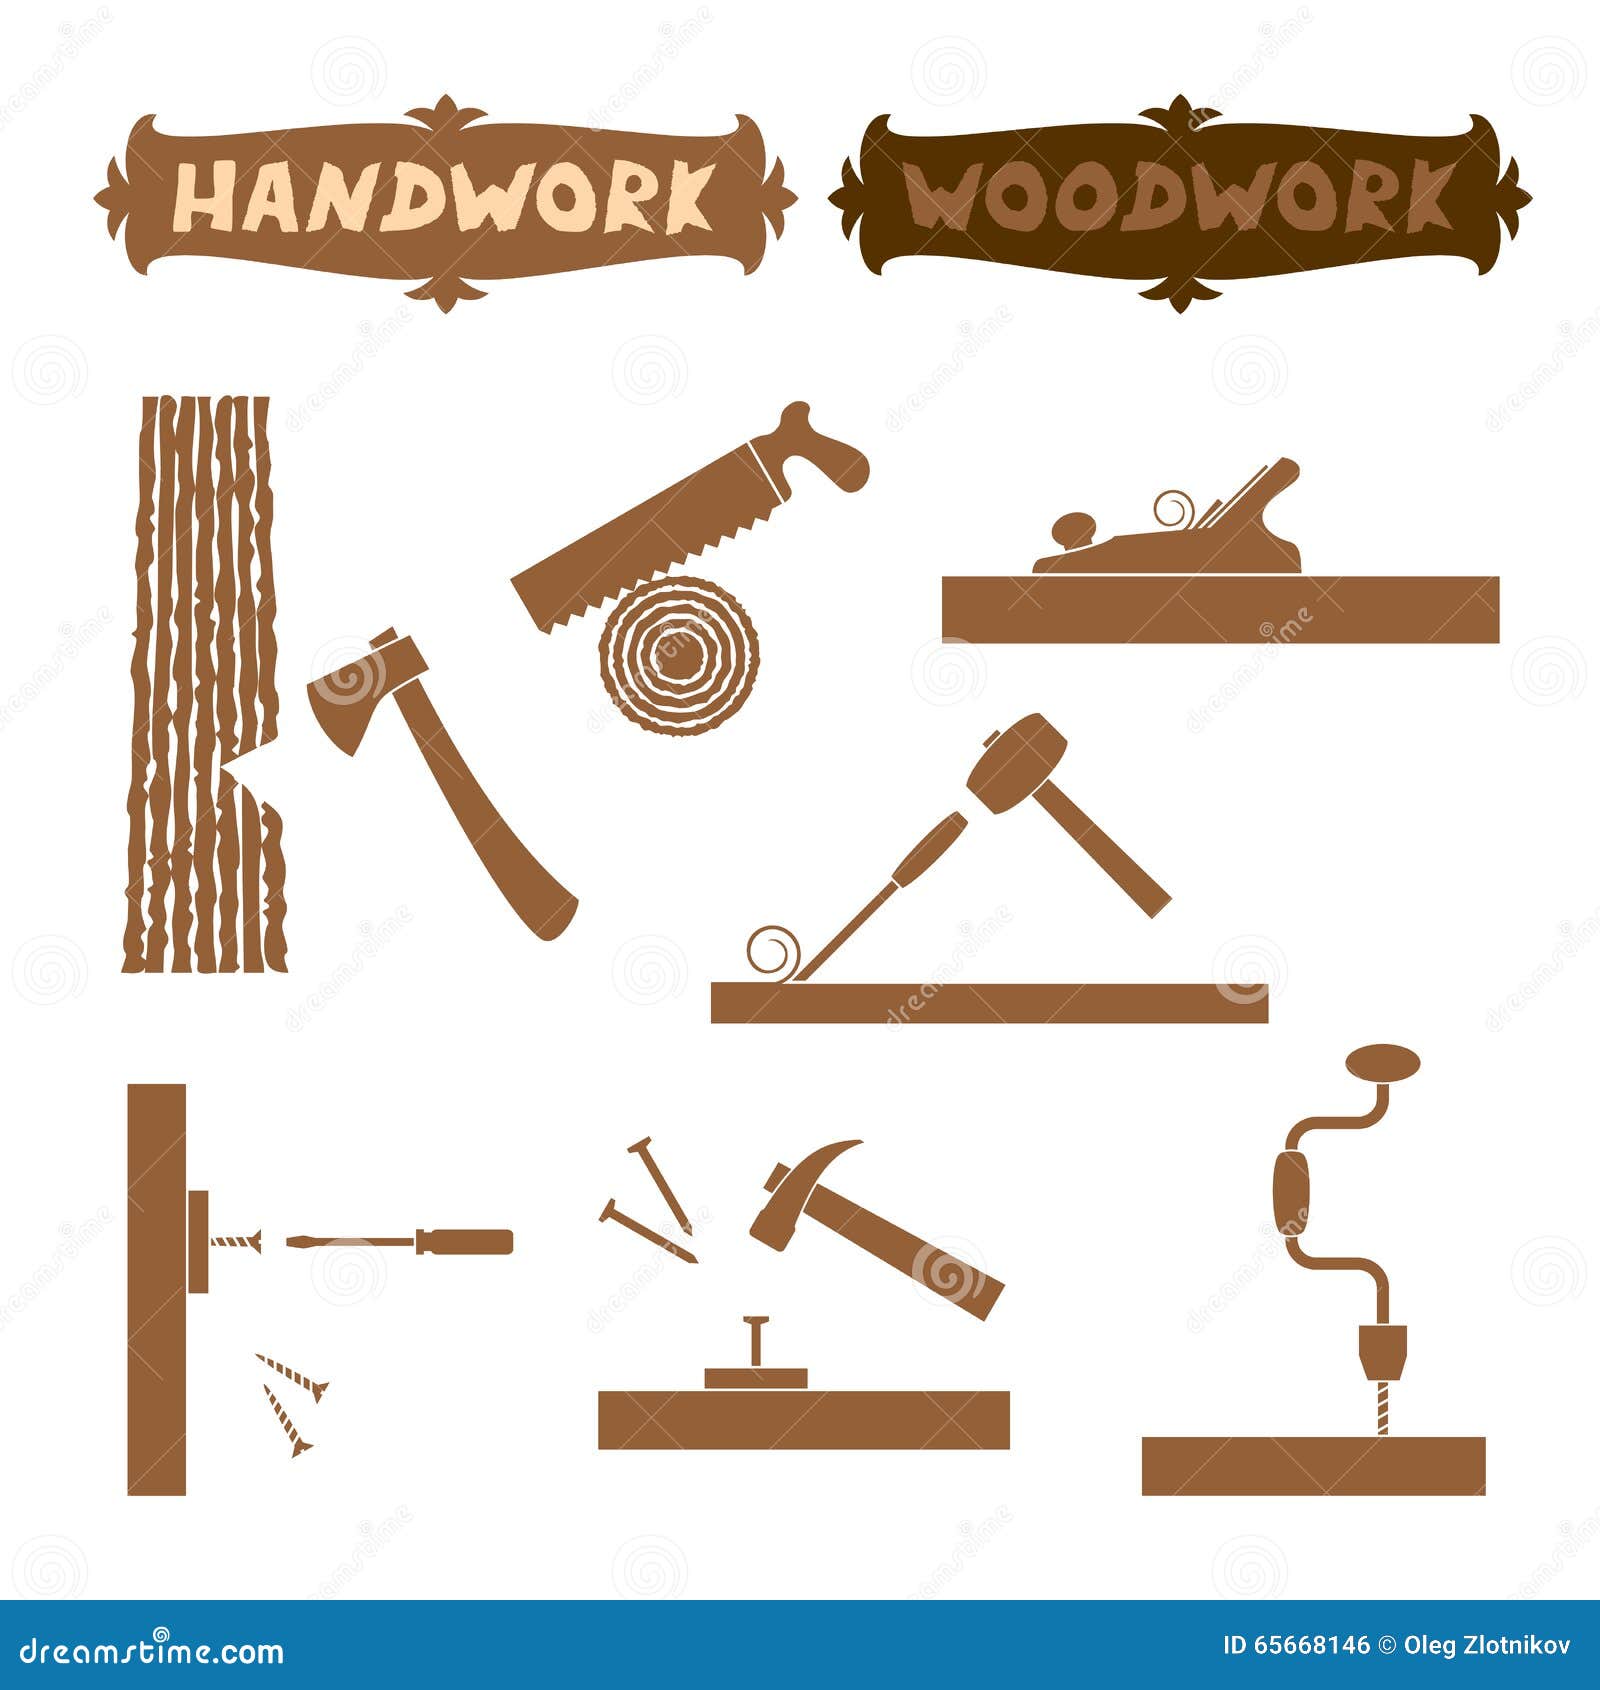 woodworking tools clip art free - photo #13